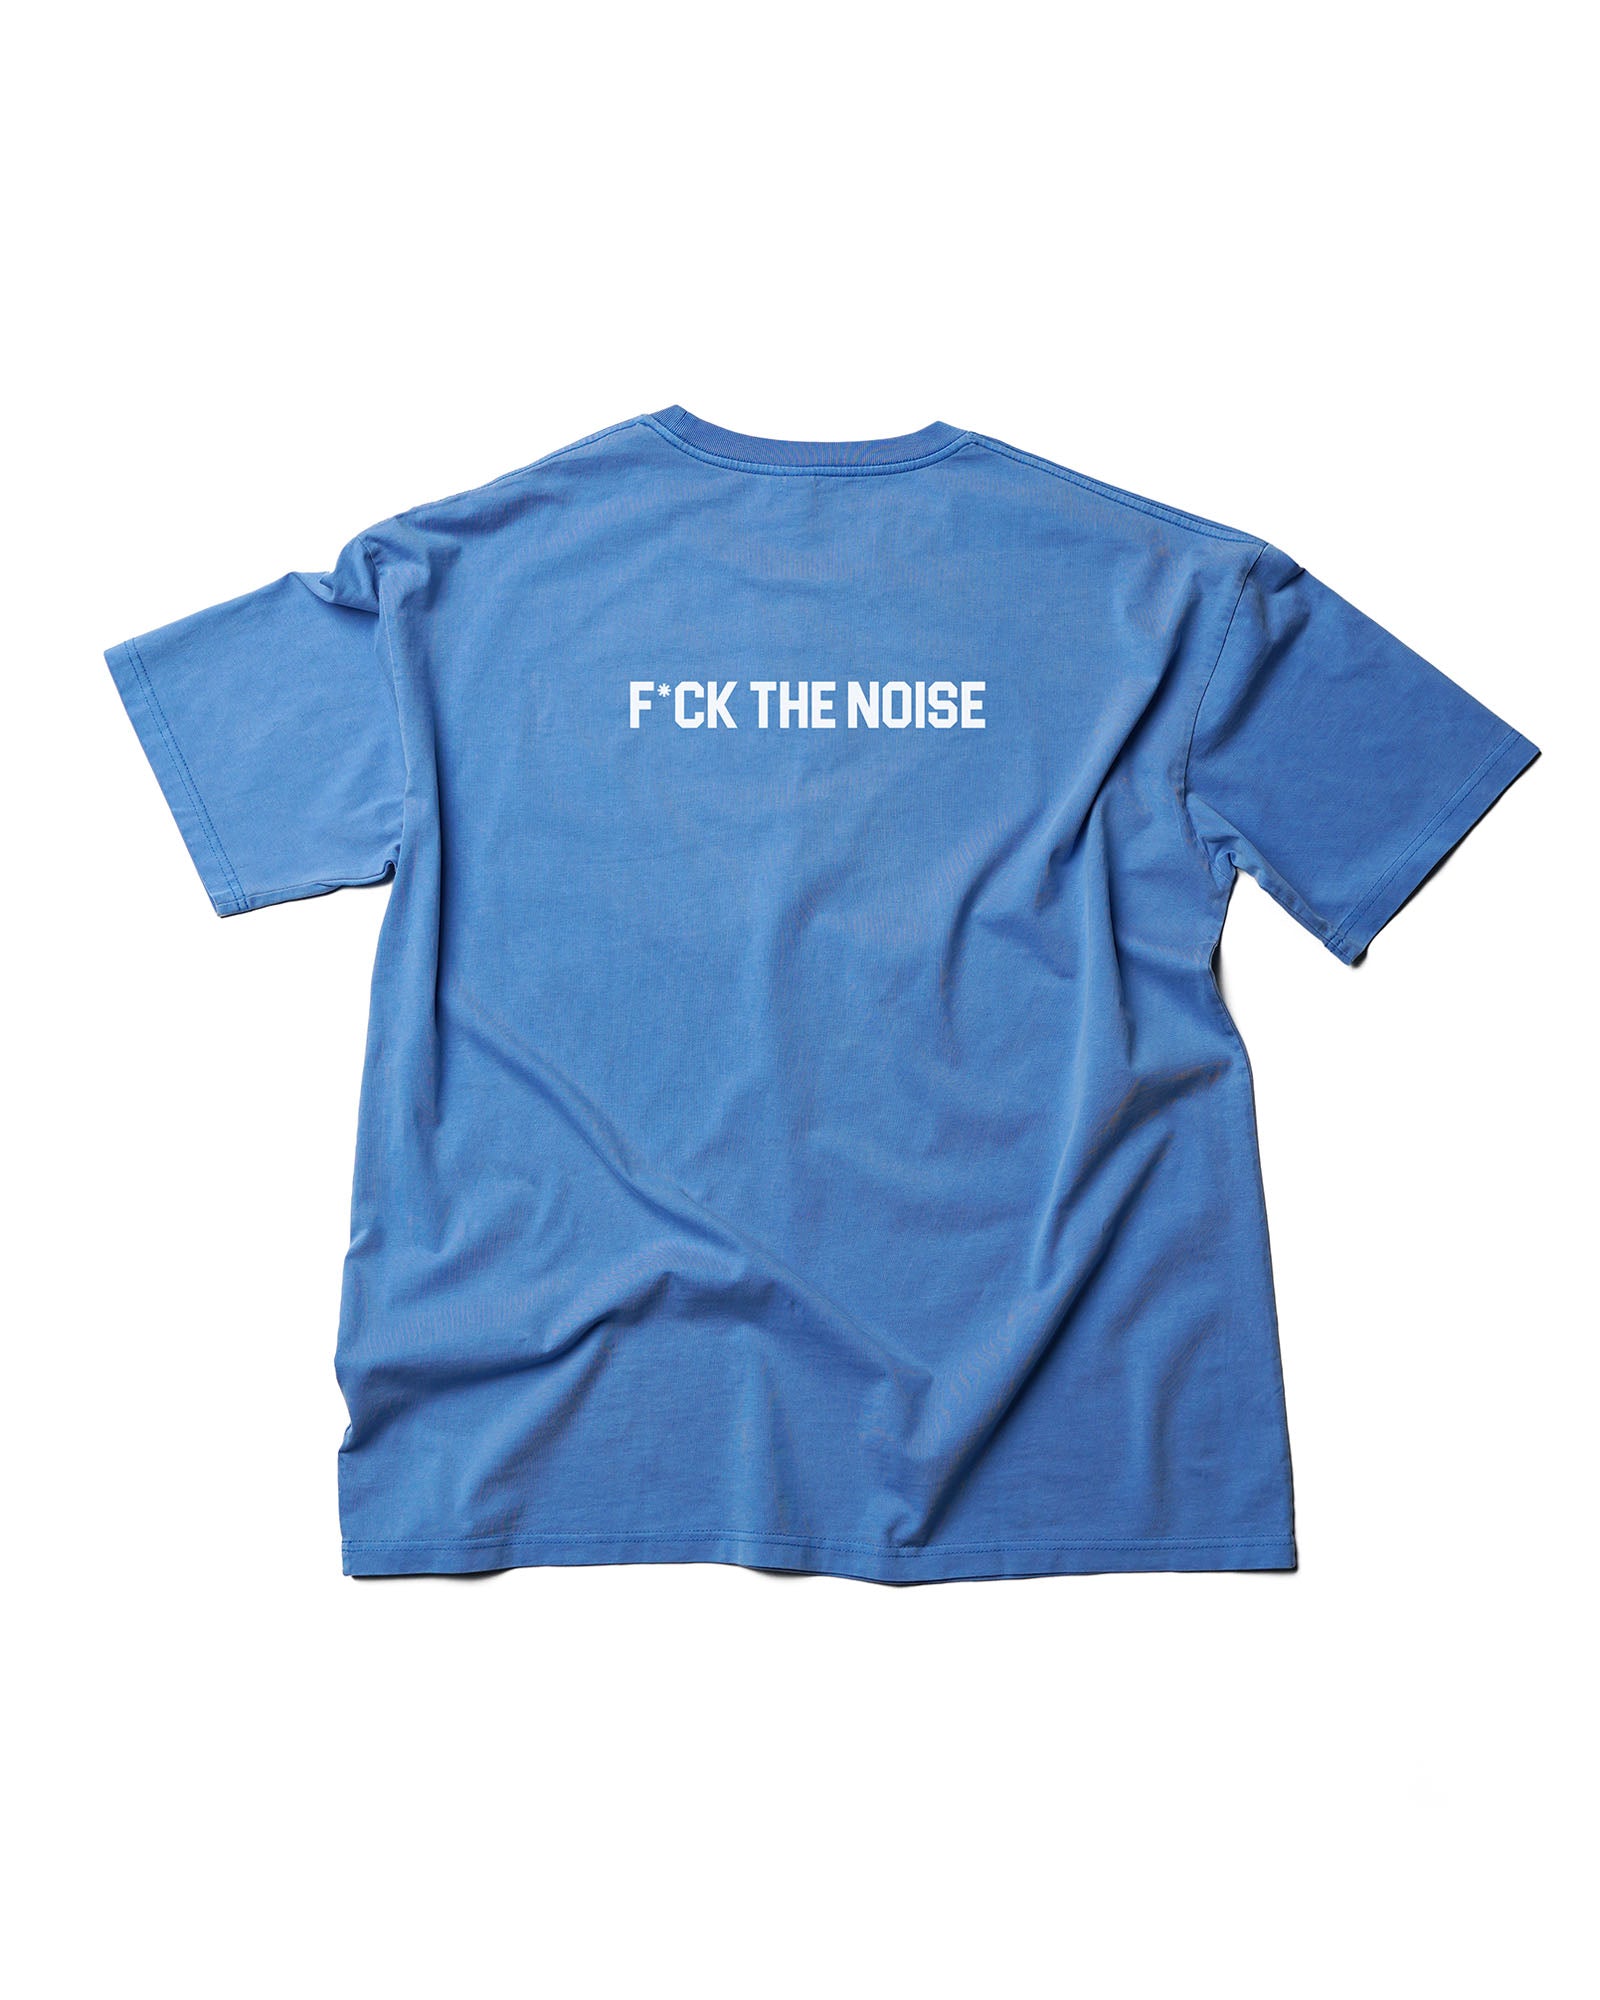 uppper t-shirt FTN washed blue